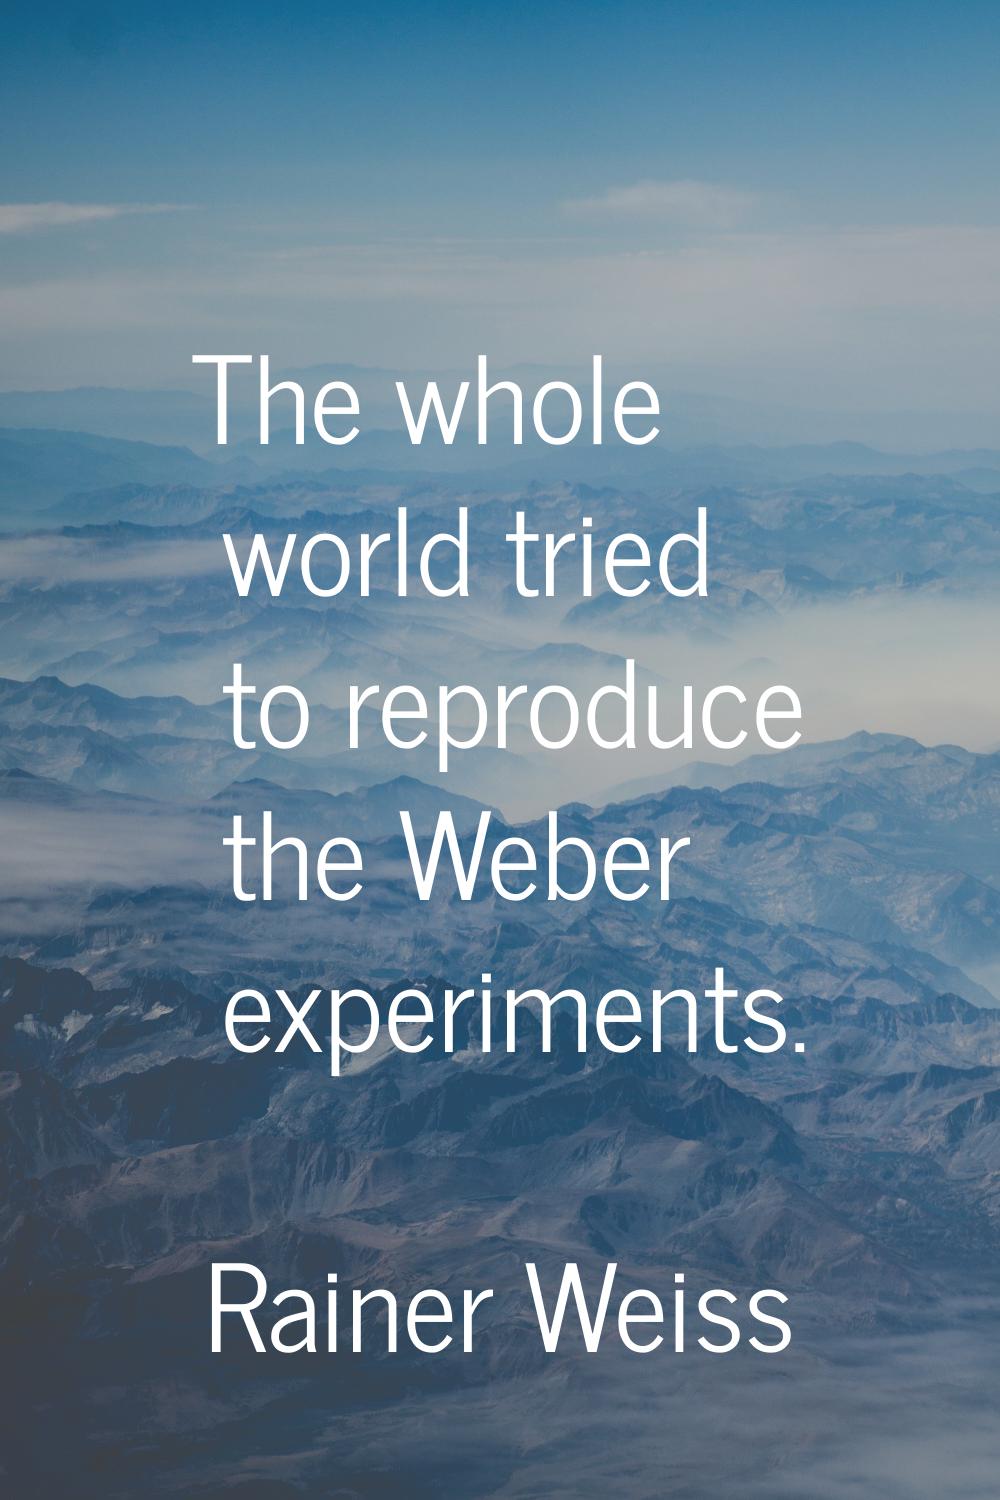 The whole world tried to reproduce the Weber experiments.